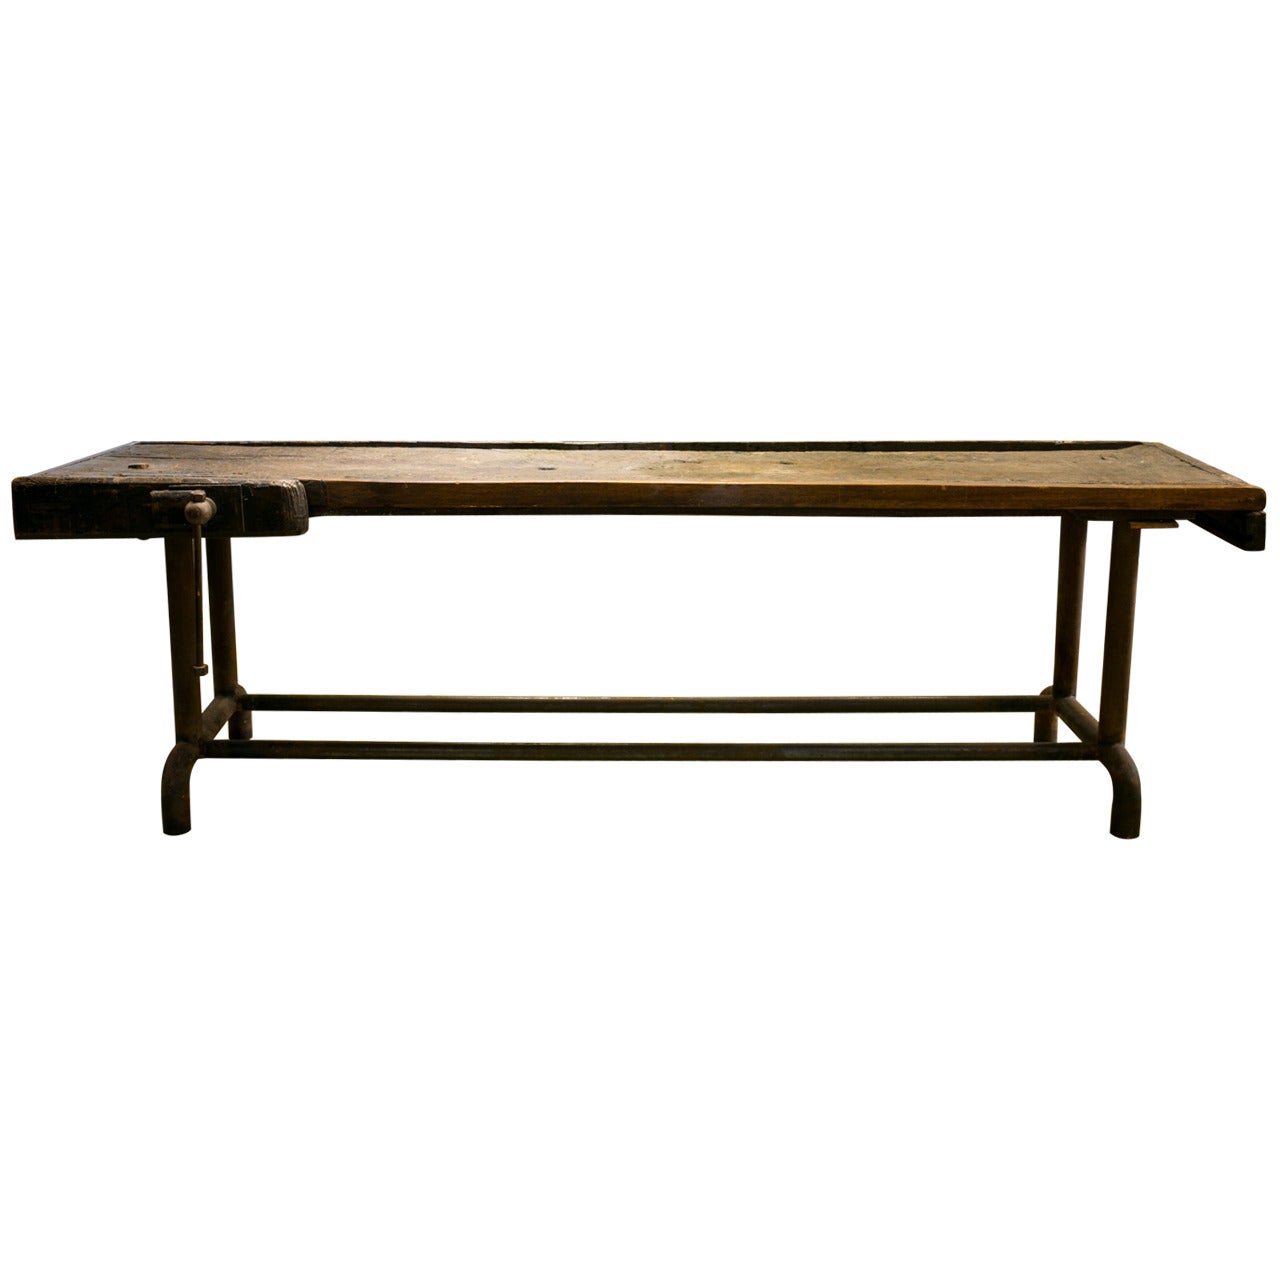 Long Industrial Work Table with Wood Top and Iron Base from Holland, circa 1900